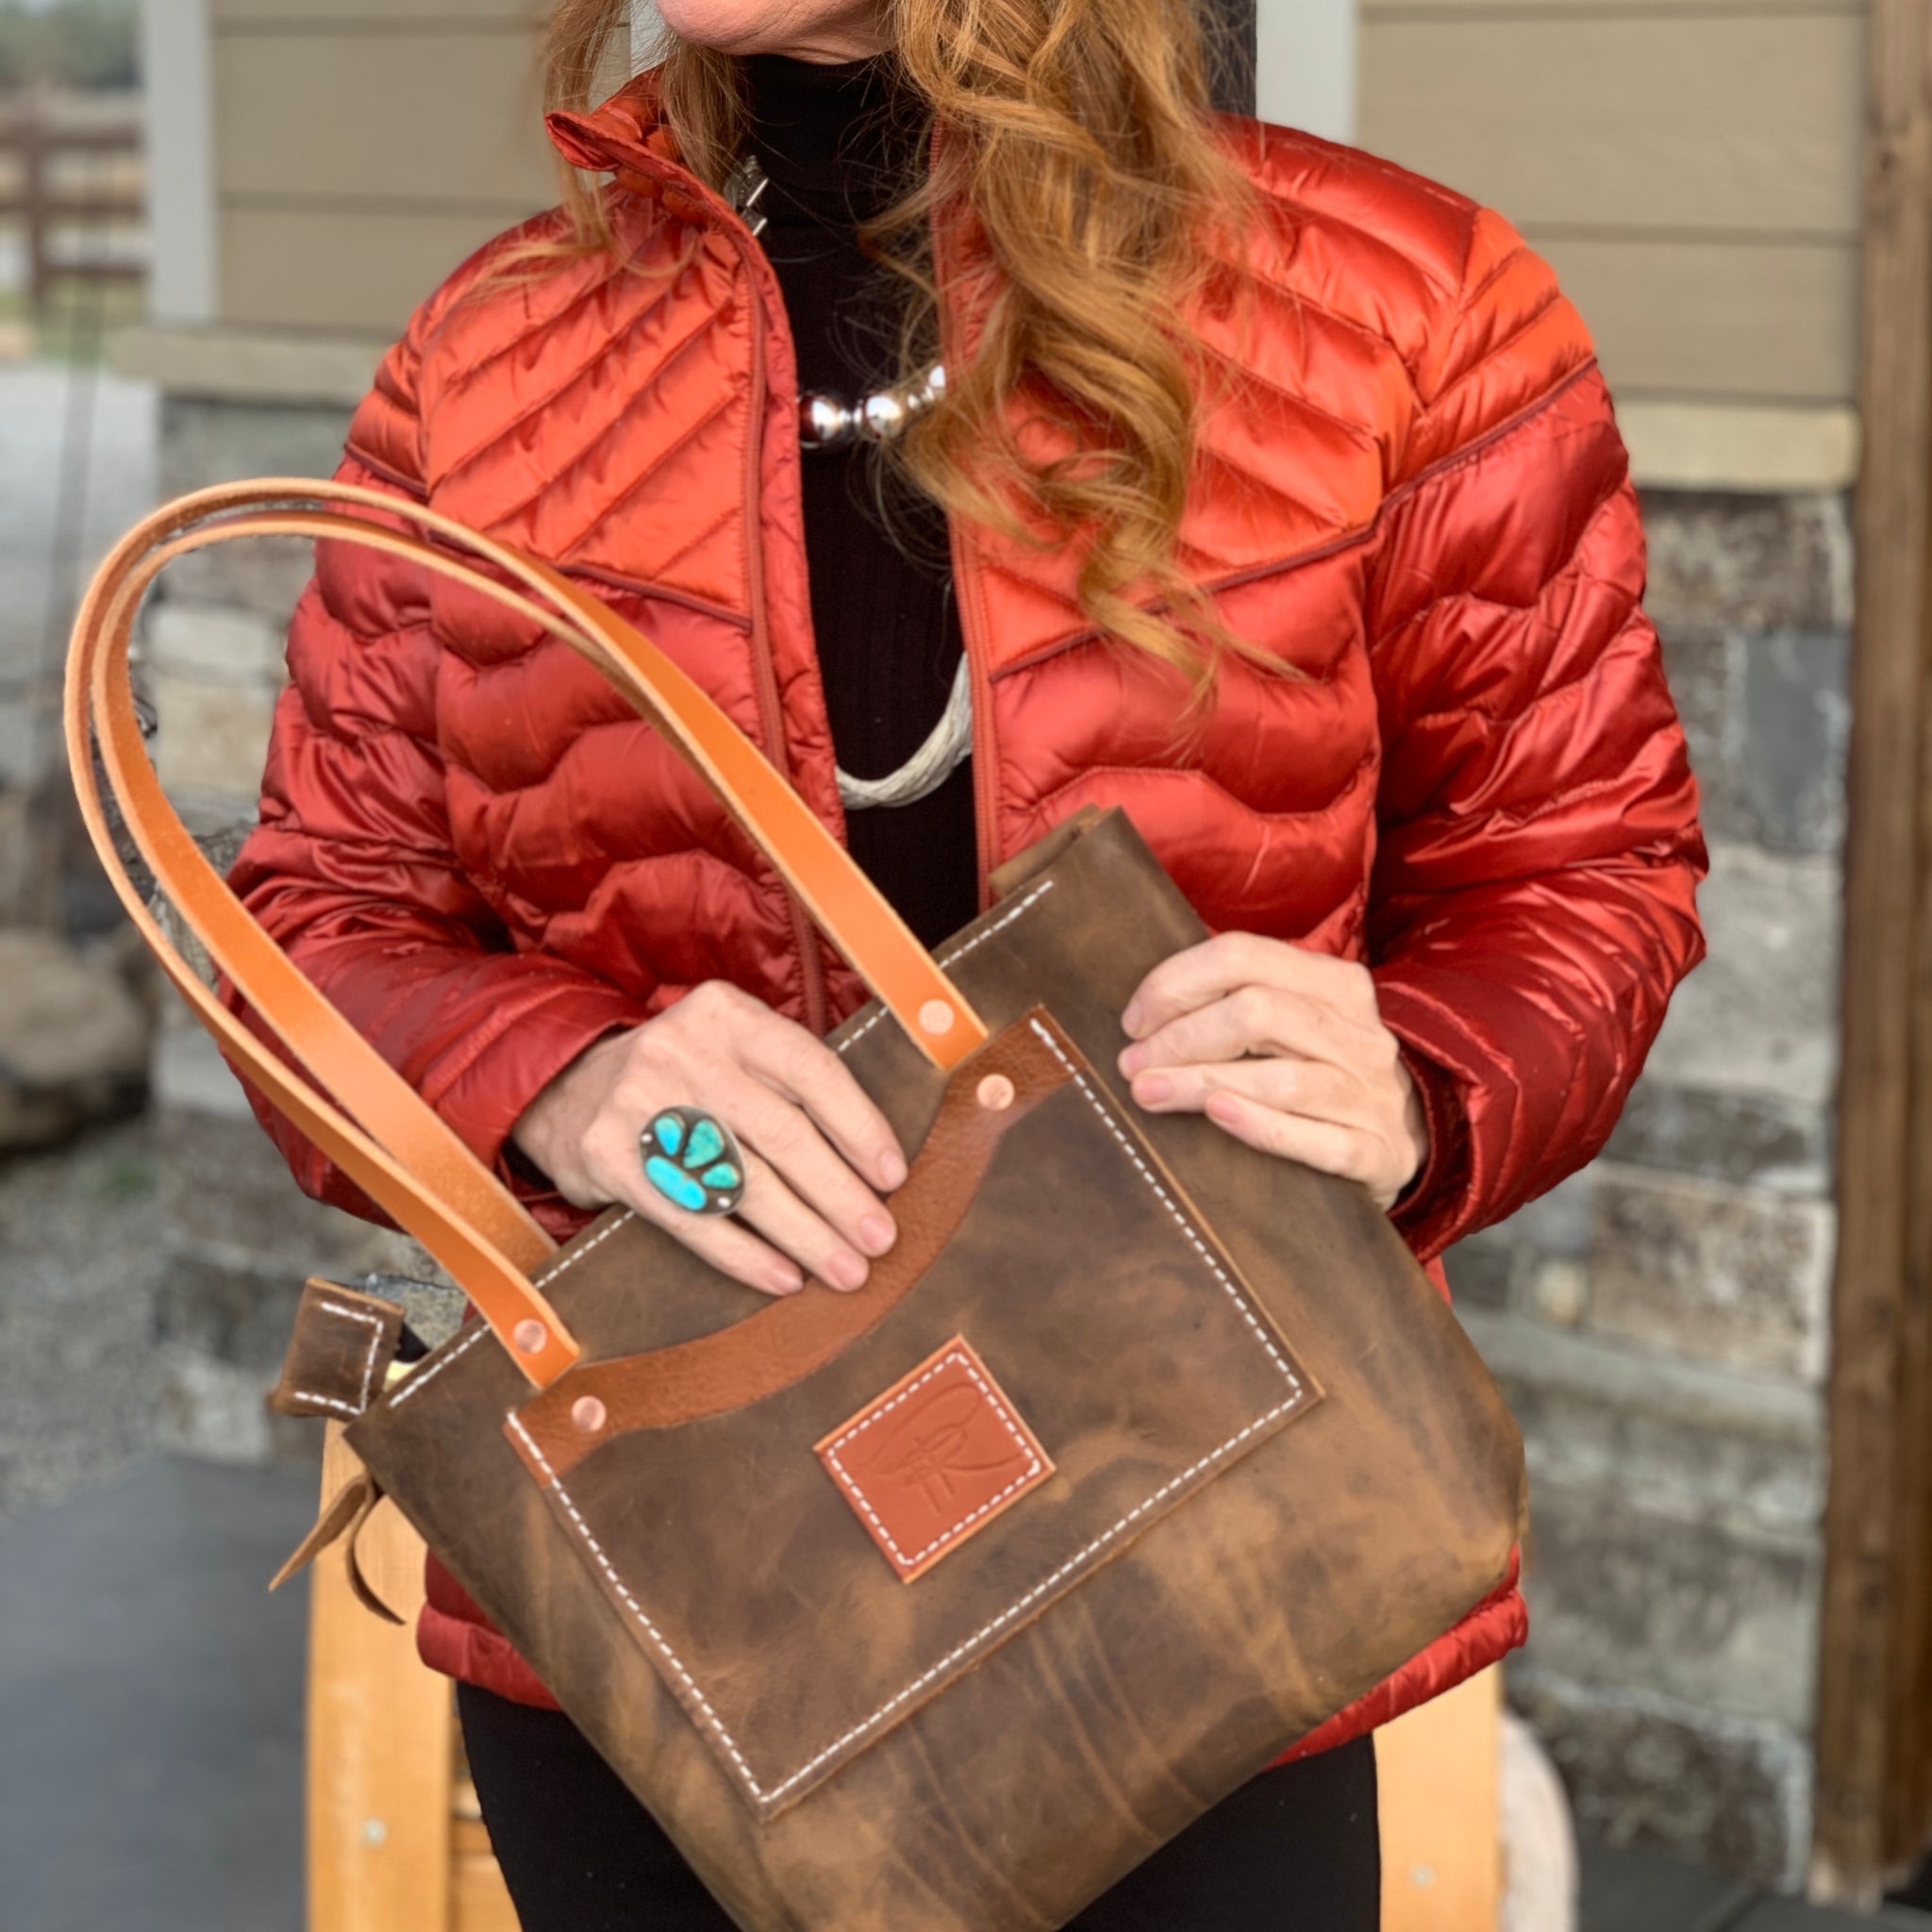 panhandle red leather store leather shop retail shopping boutique handcrafted retail products boutique